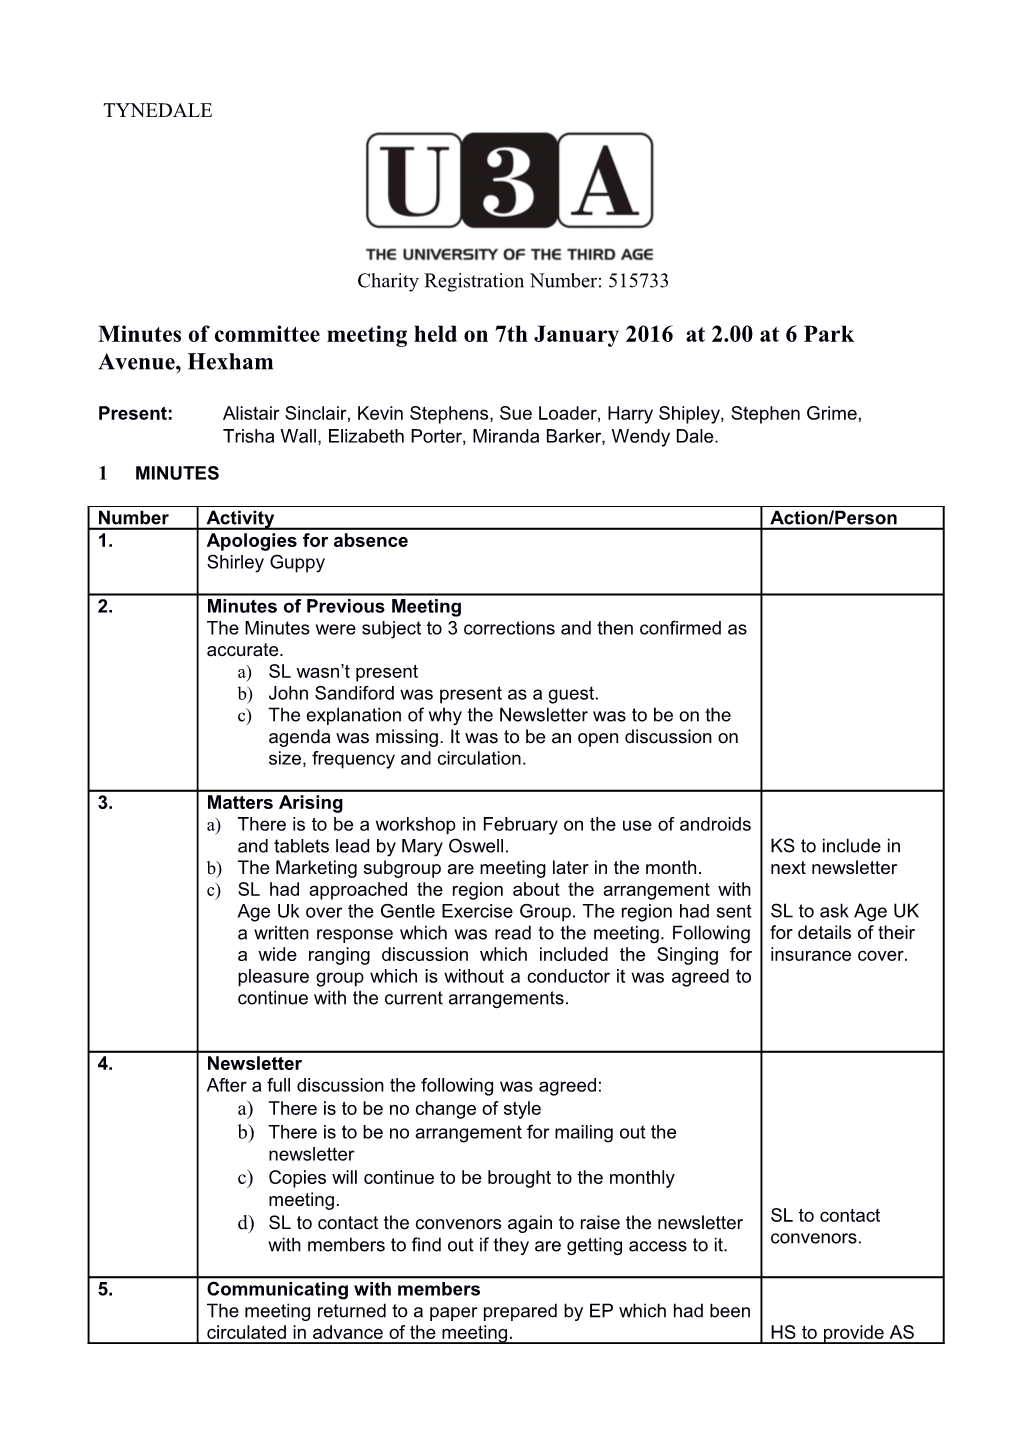 Minutes of Committee Meeting Held on 7Th January 2016 at 2.00 at 6 Park Avenue, Hexham